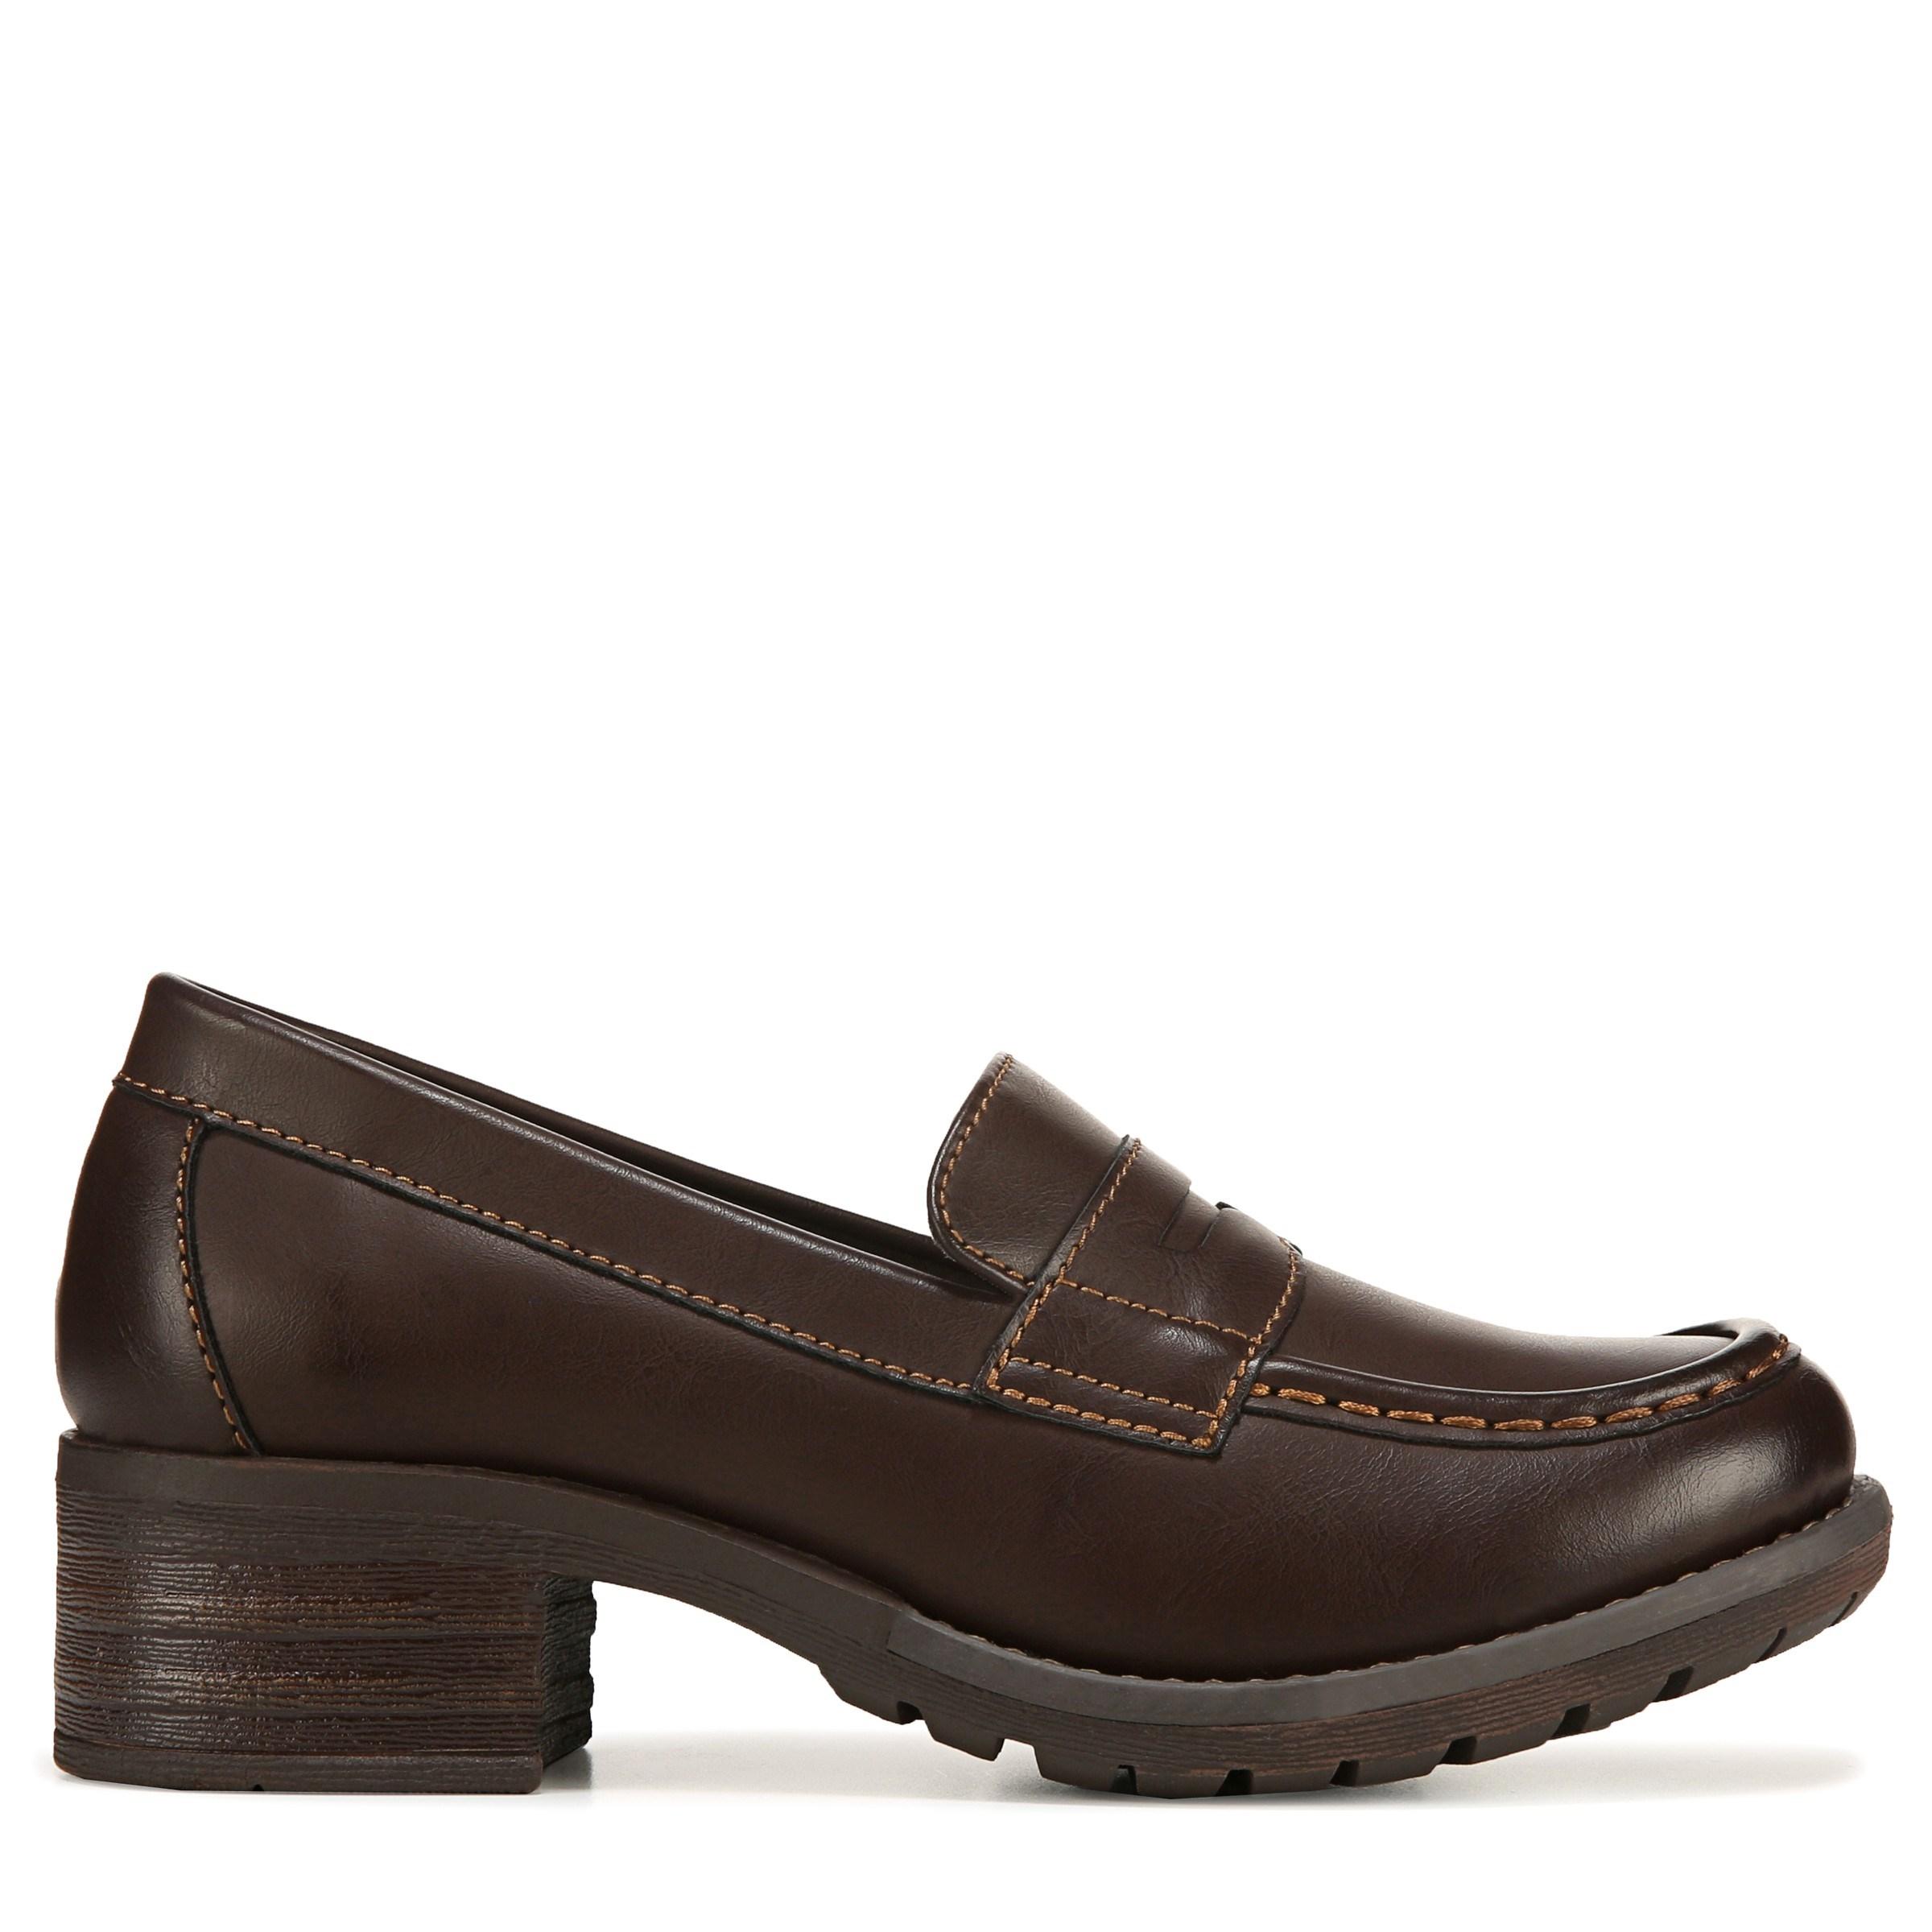 Eastland Holly Penny Loafers in Brown - Lyst